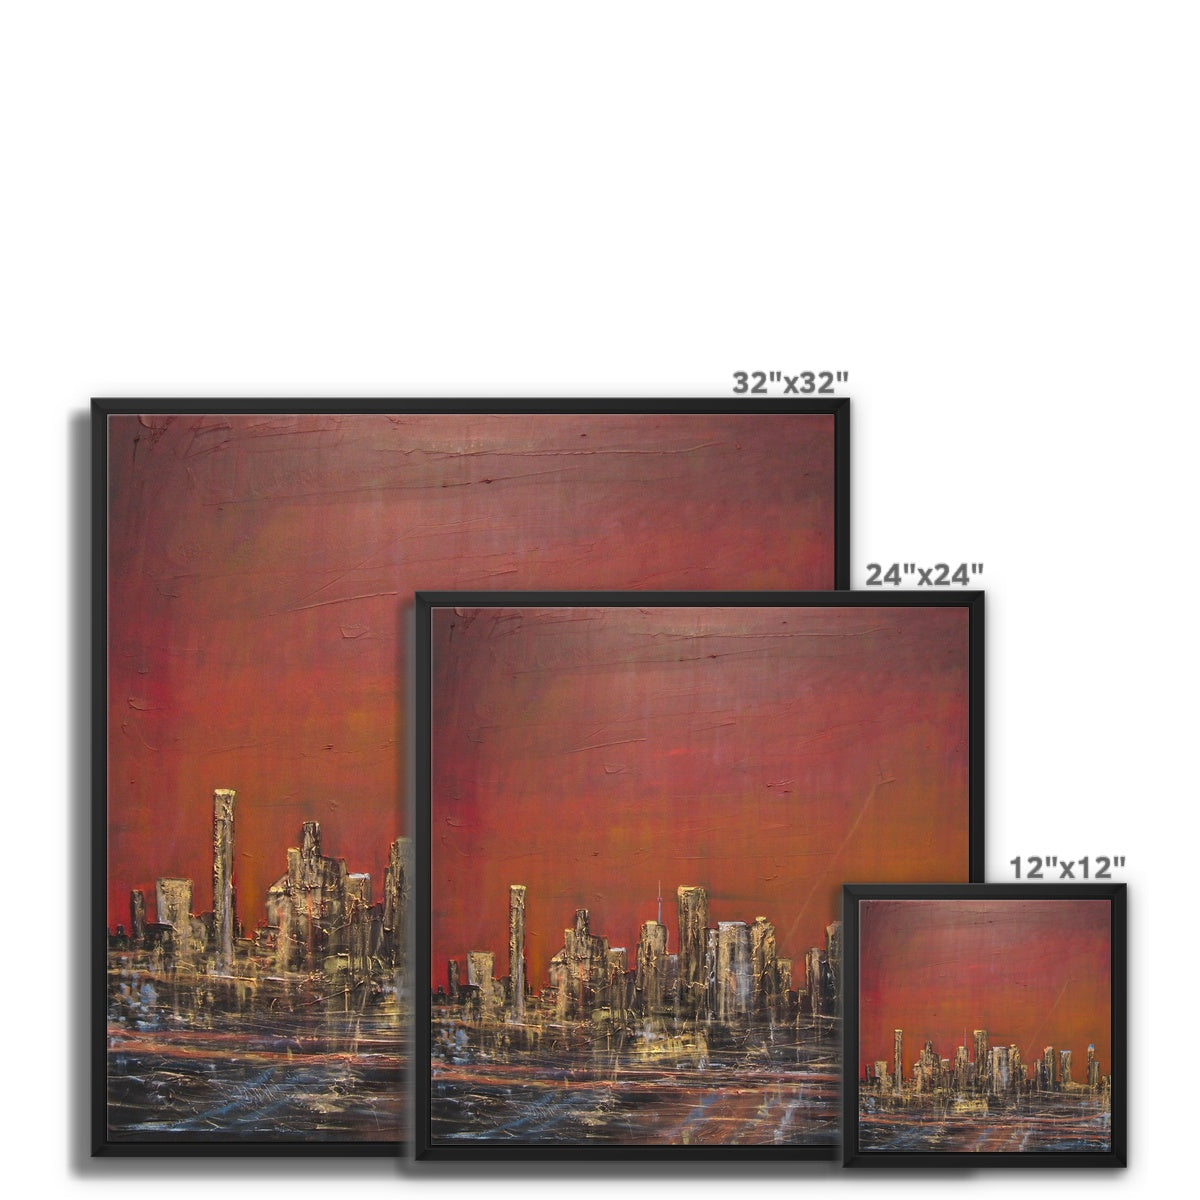 Houston Dusk Texas Painting | Framed Canvas From Scotland-Floating Framed Canvas Prints-World Art Gallery-Paintings, Prints, Homeware, Art Gifts From Scotland By Scottish Artist Kevin Hunter